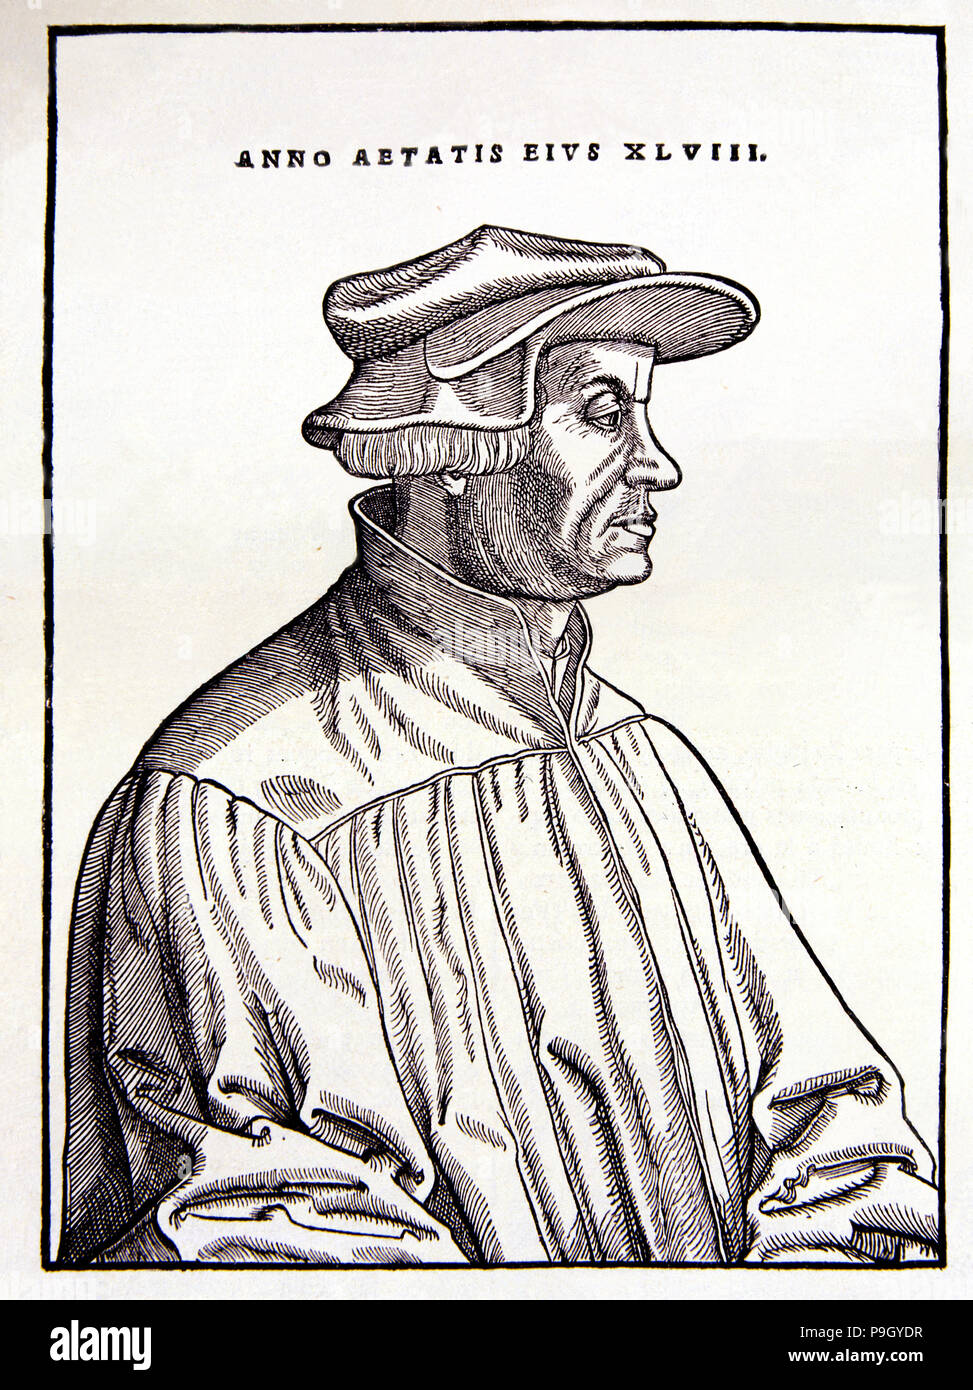 Verico Zwingli (1484-1531), Swiss humanist and reformer in an engraving of the age. Stock Photo